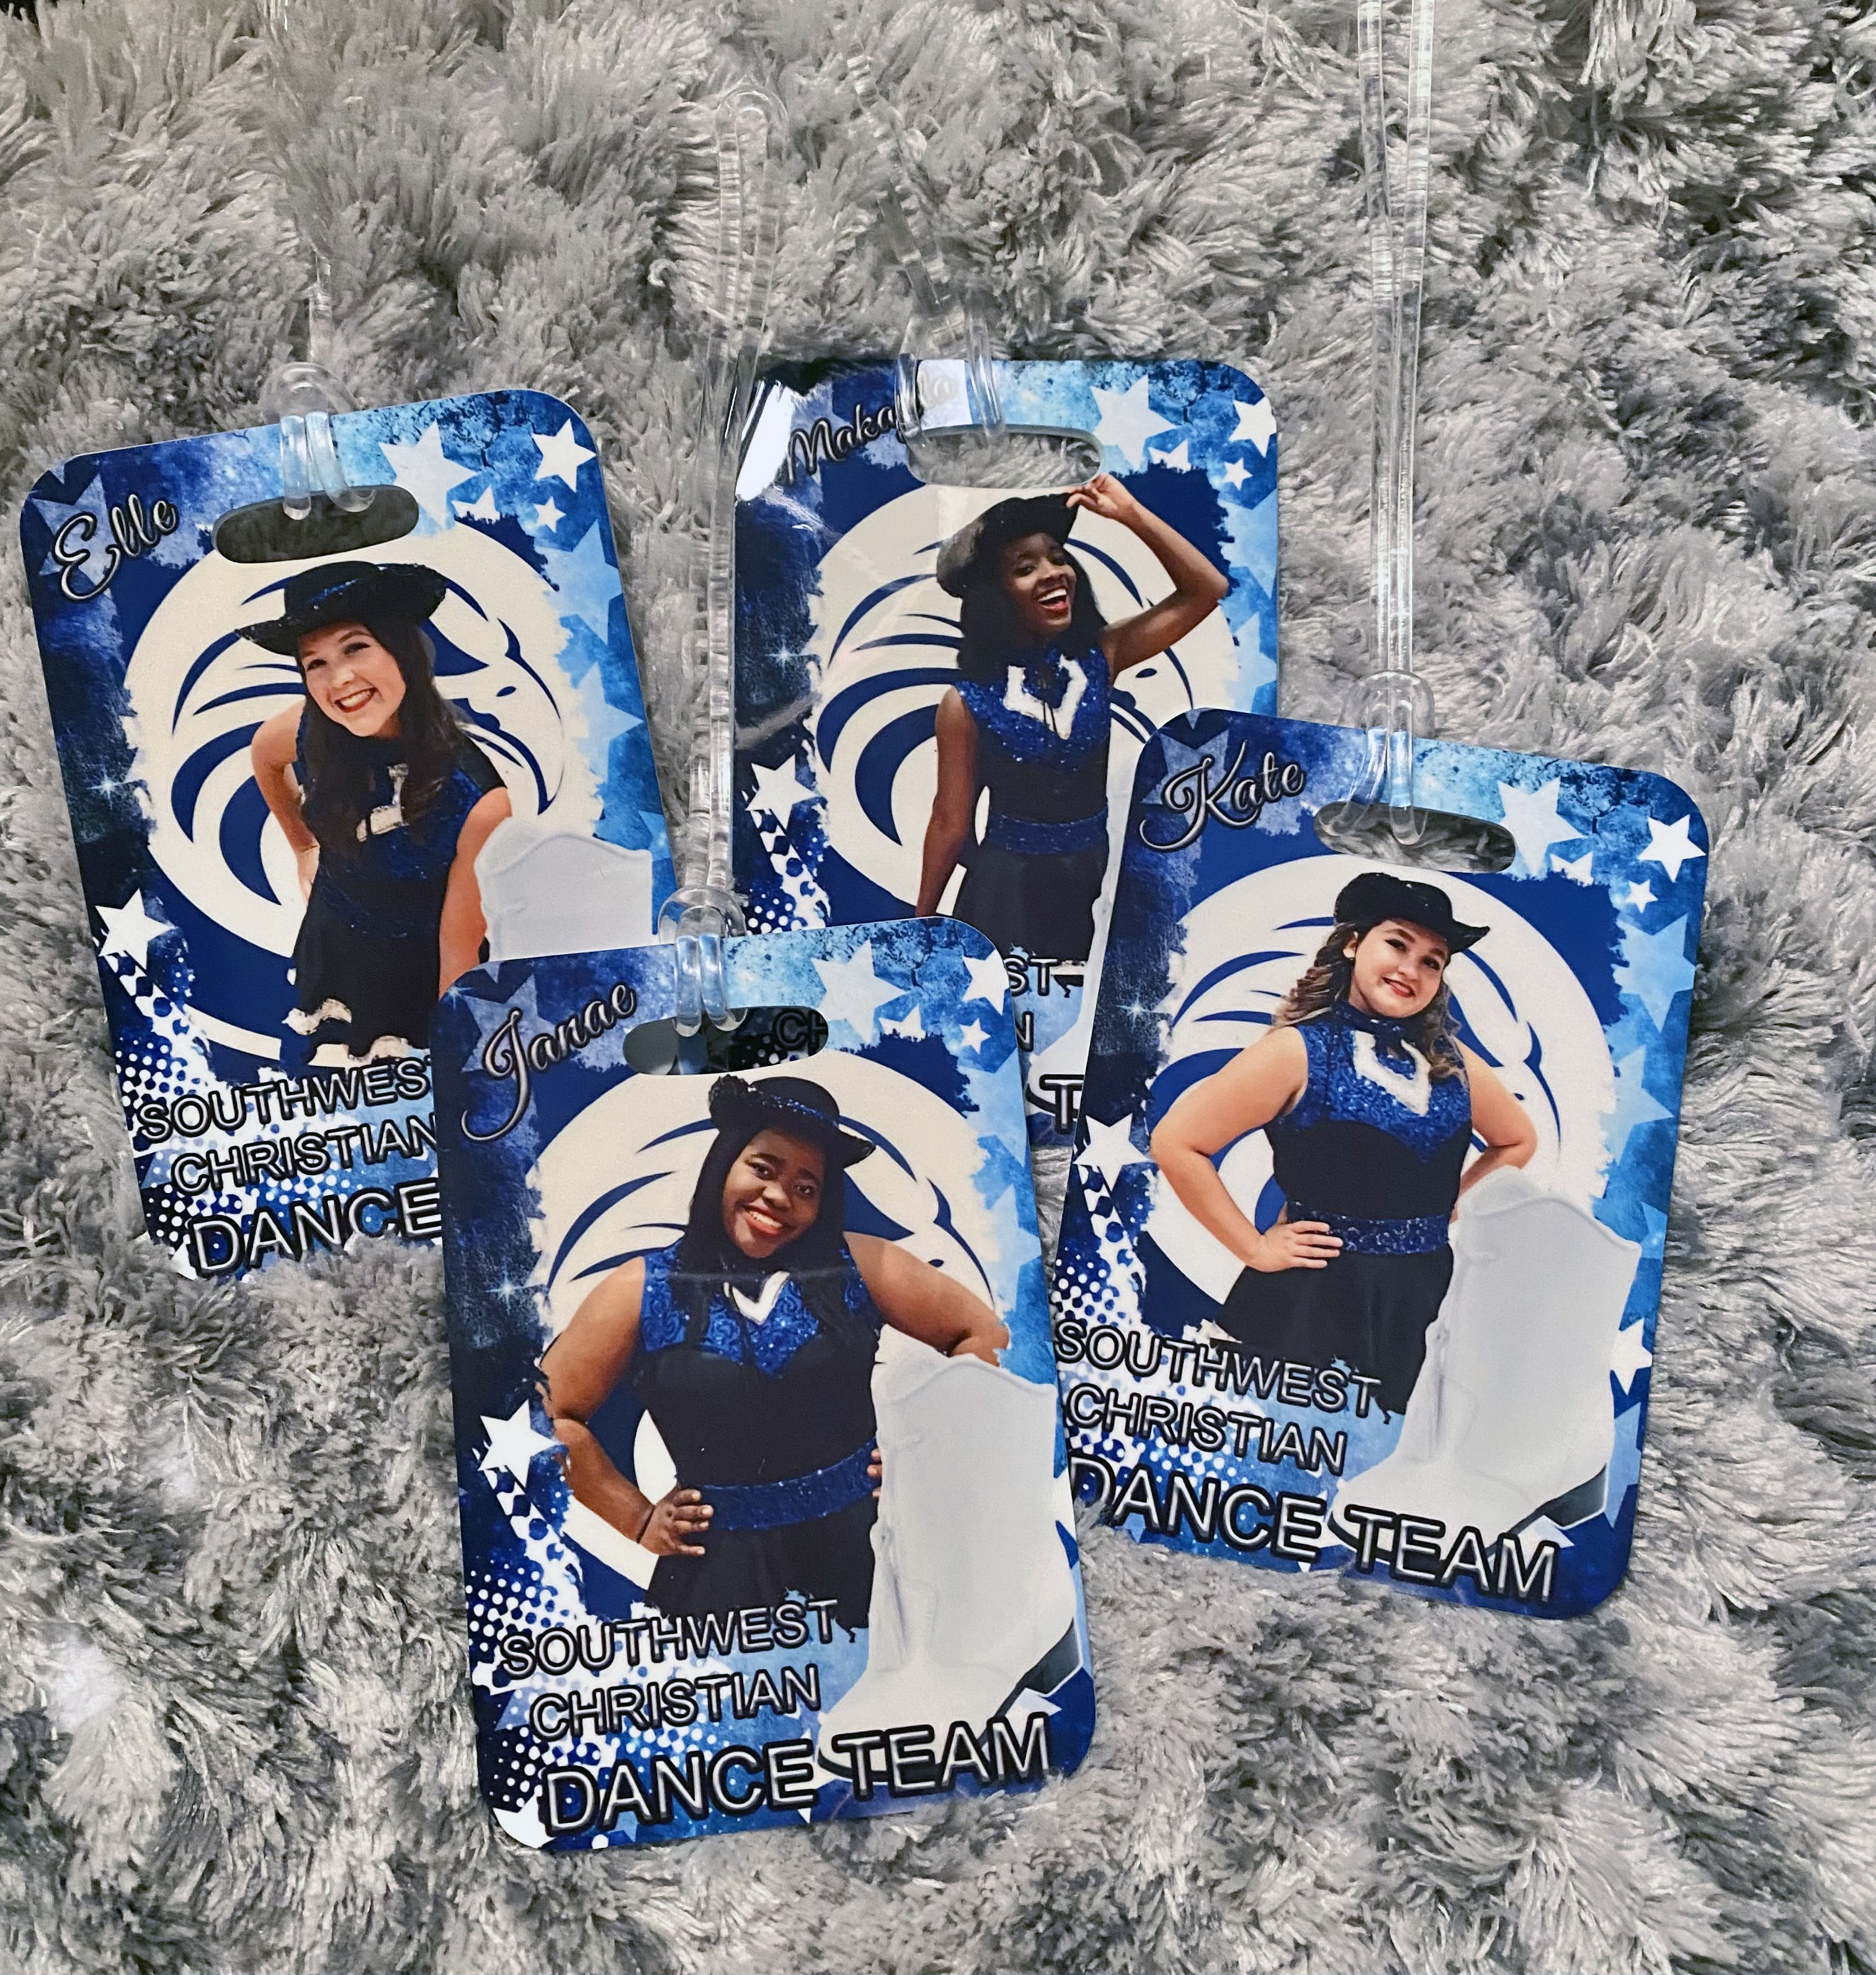 Eaglettes Dance Team Bag Tags made with sublimation printing